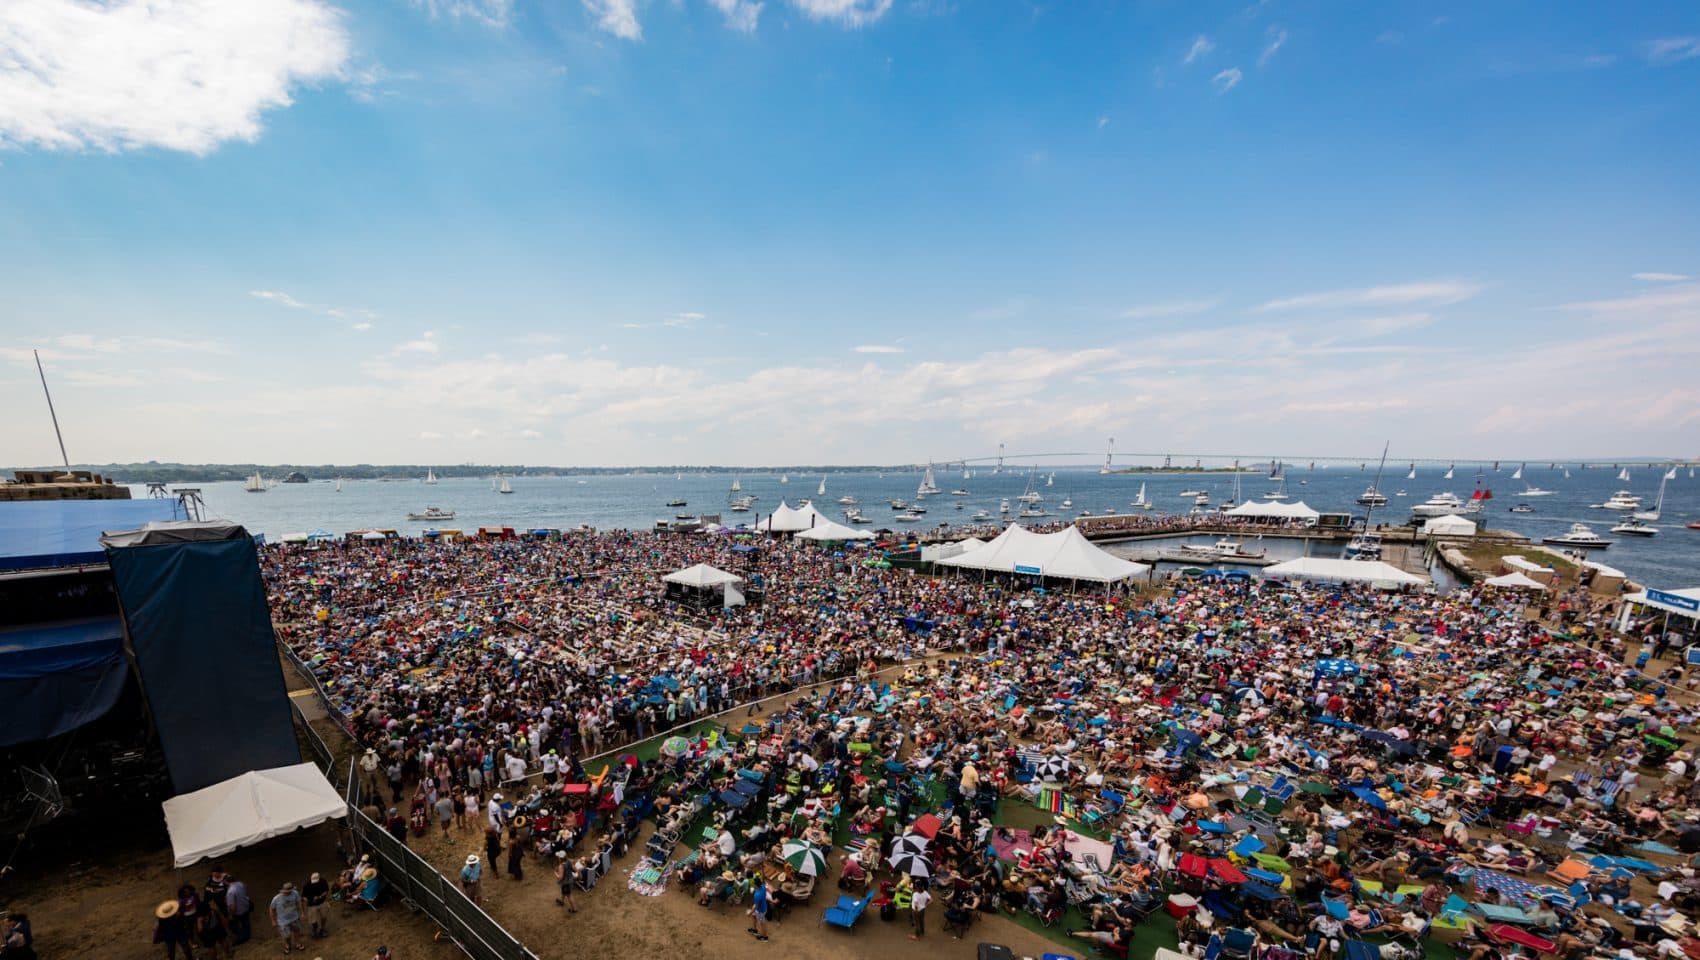 A view of the crowd at the Newport Jazz Festival in 2016. (Courtesy Douglas Mason)